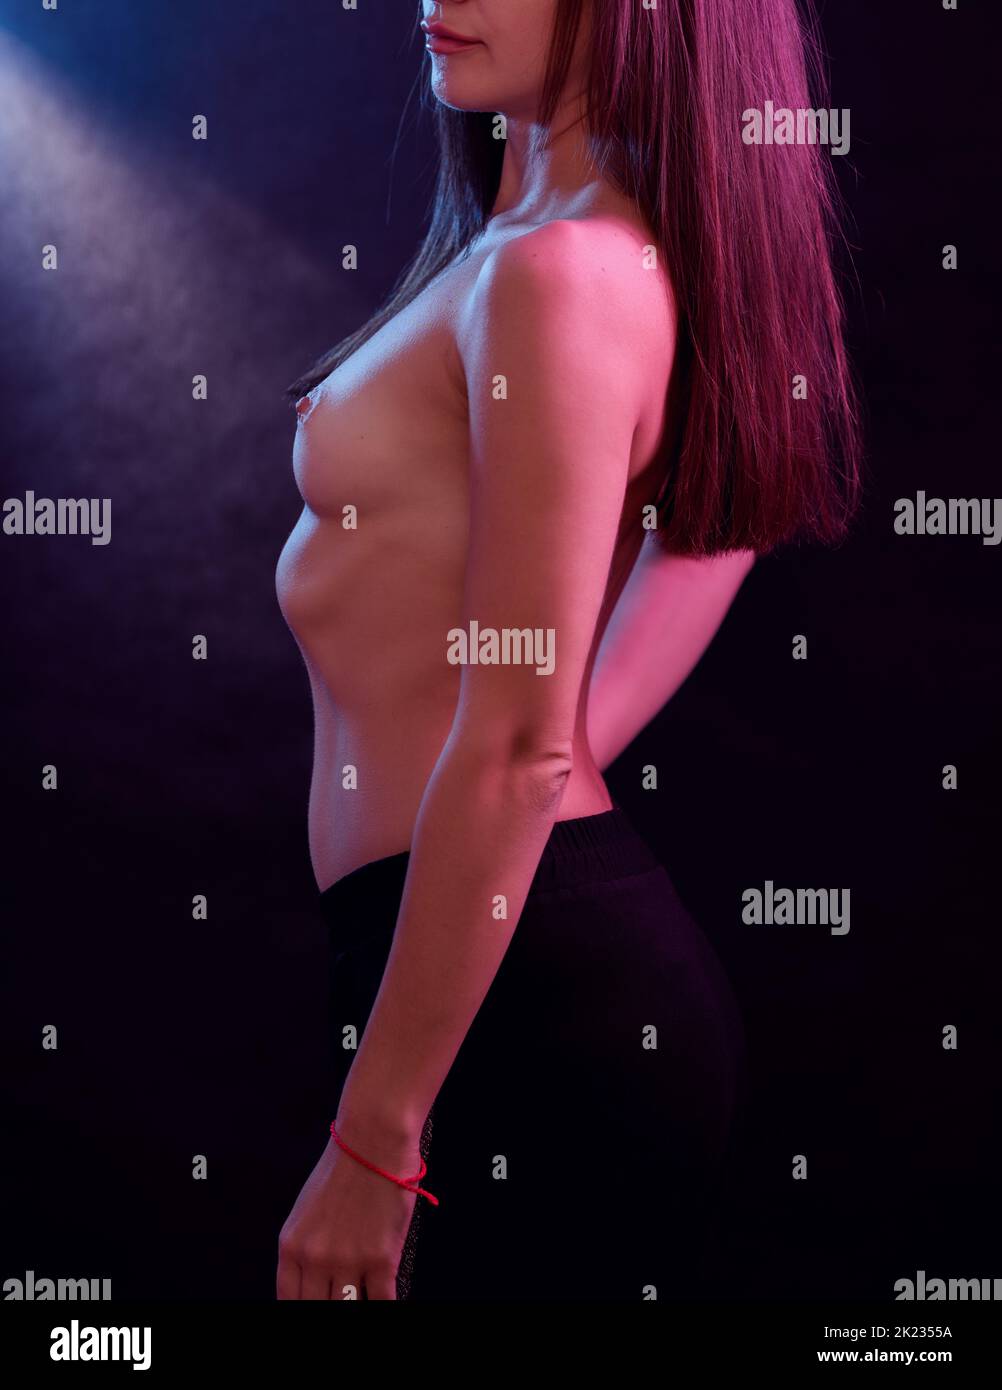 Portrait of a topless woman with colored light and dark background. Stock Photo